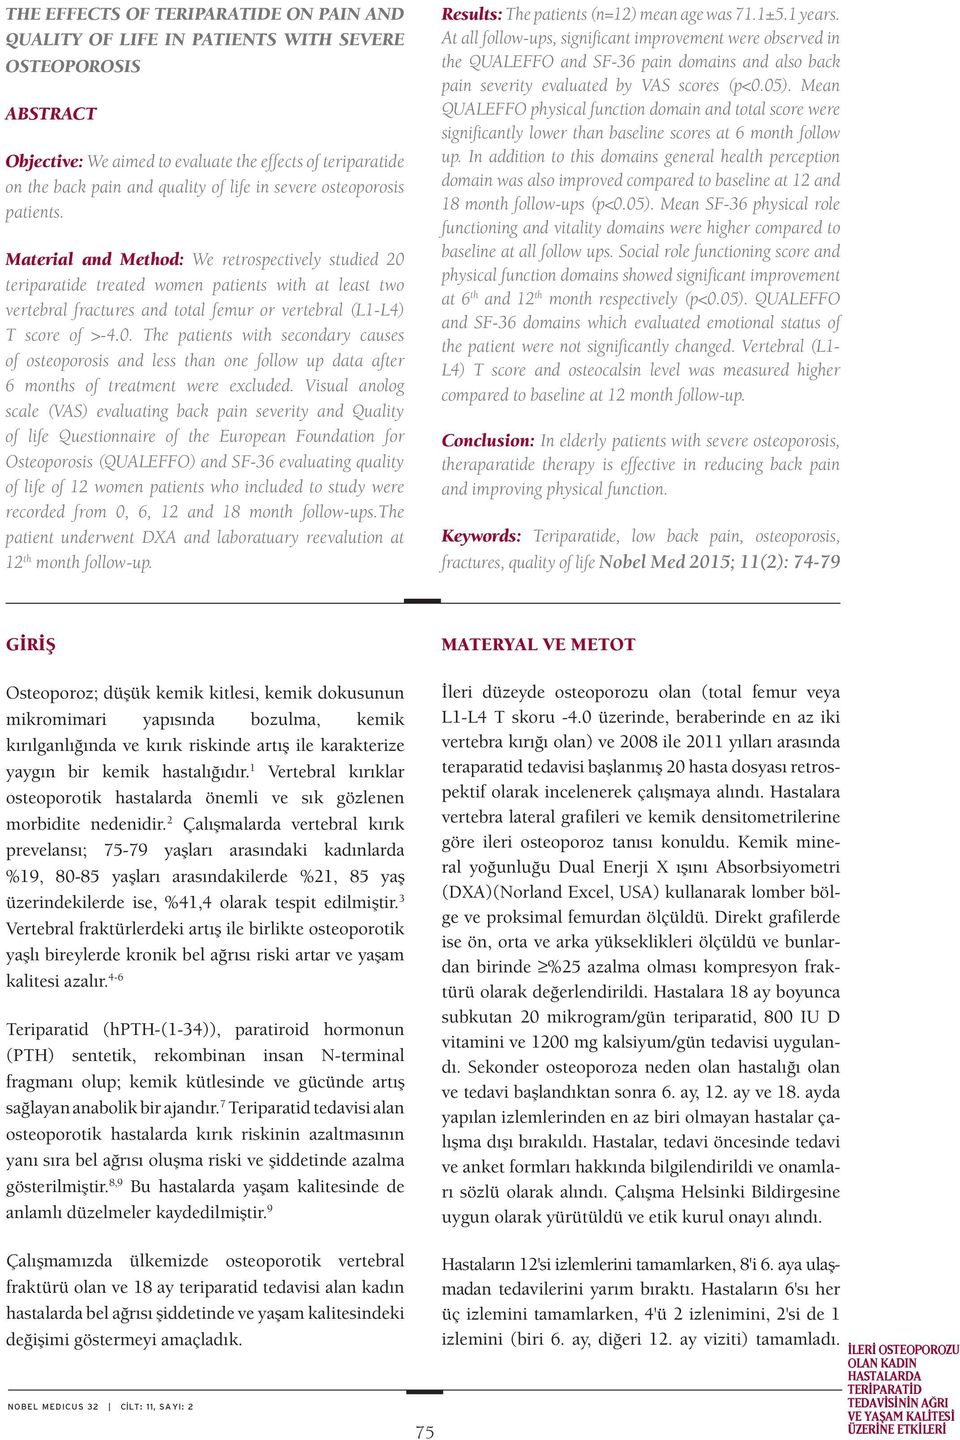 Material and Method: We retrospectively studied 20 teriparatide treated women patients with at least two vertebral fractures and total femur or vertebral (L1-L4) T score of >-4.0. The patients with secondary causes of osteoporosis and less than one follow up data after 6 months of treatment were excluded.